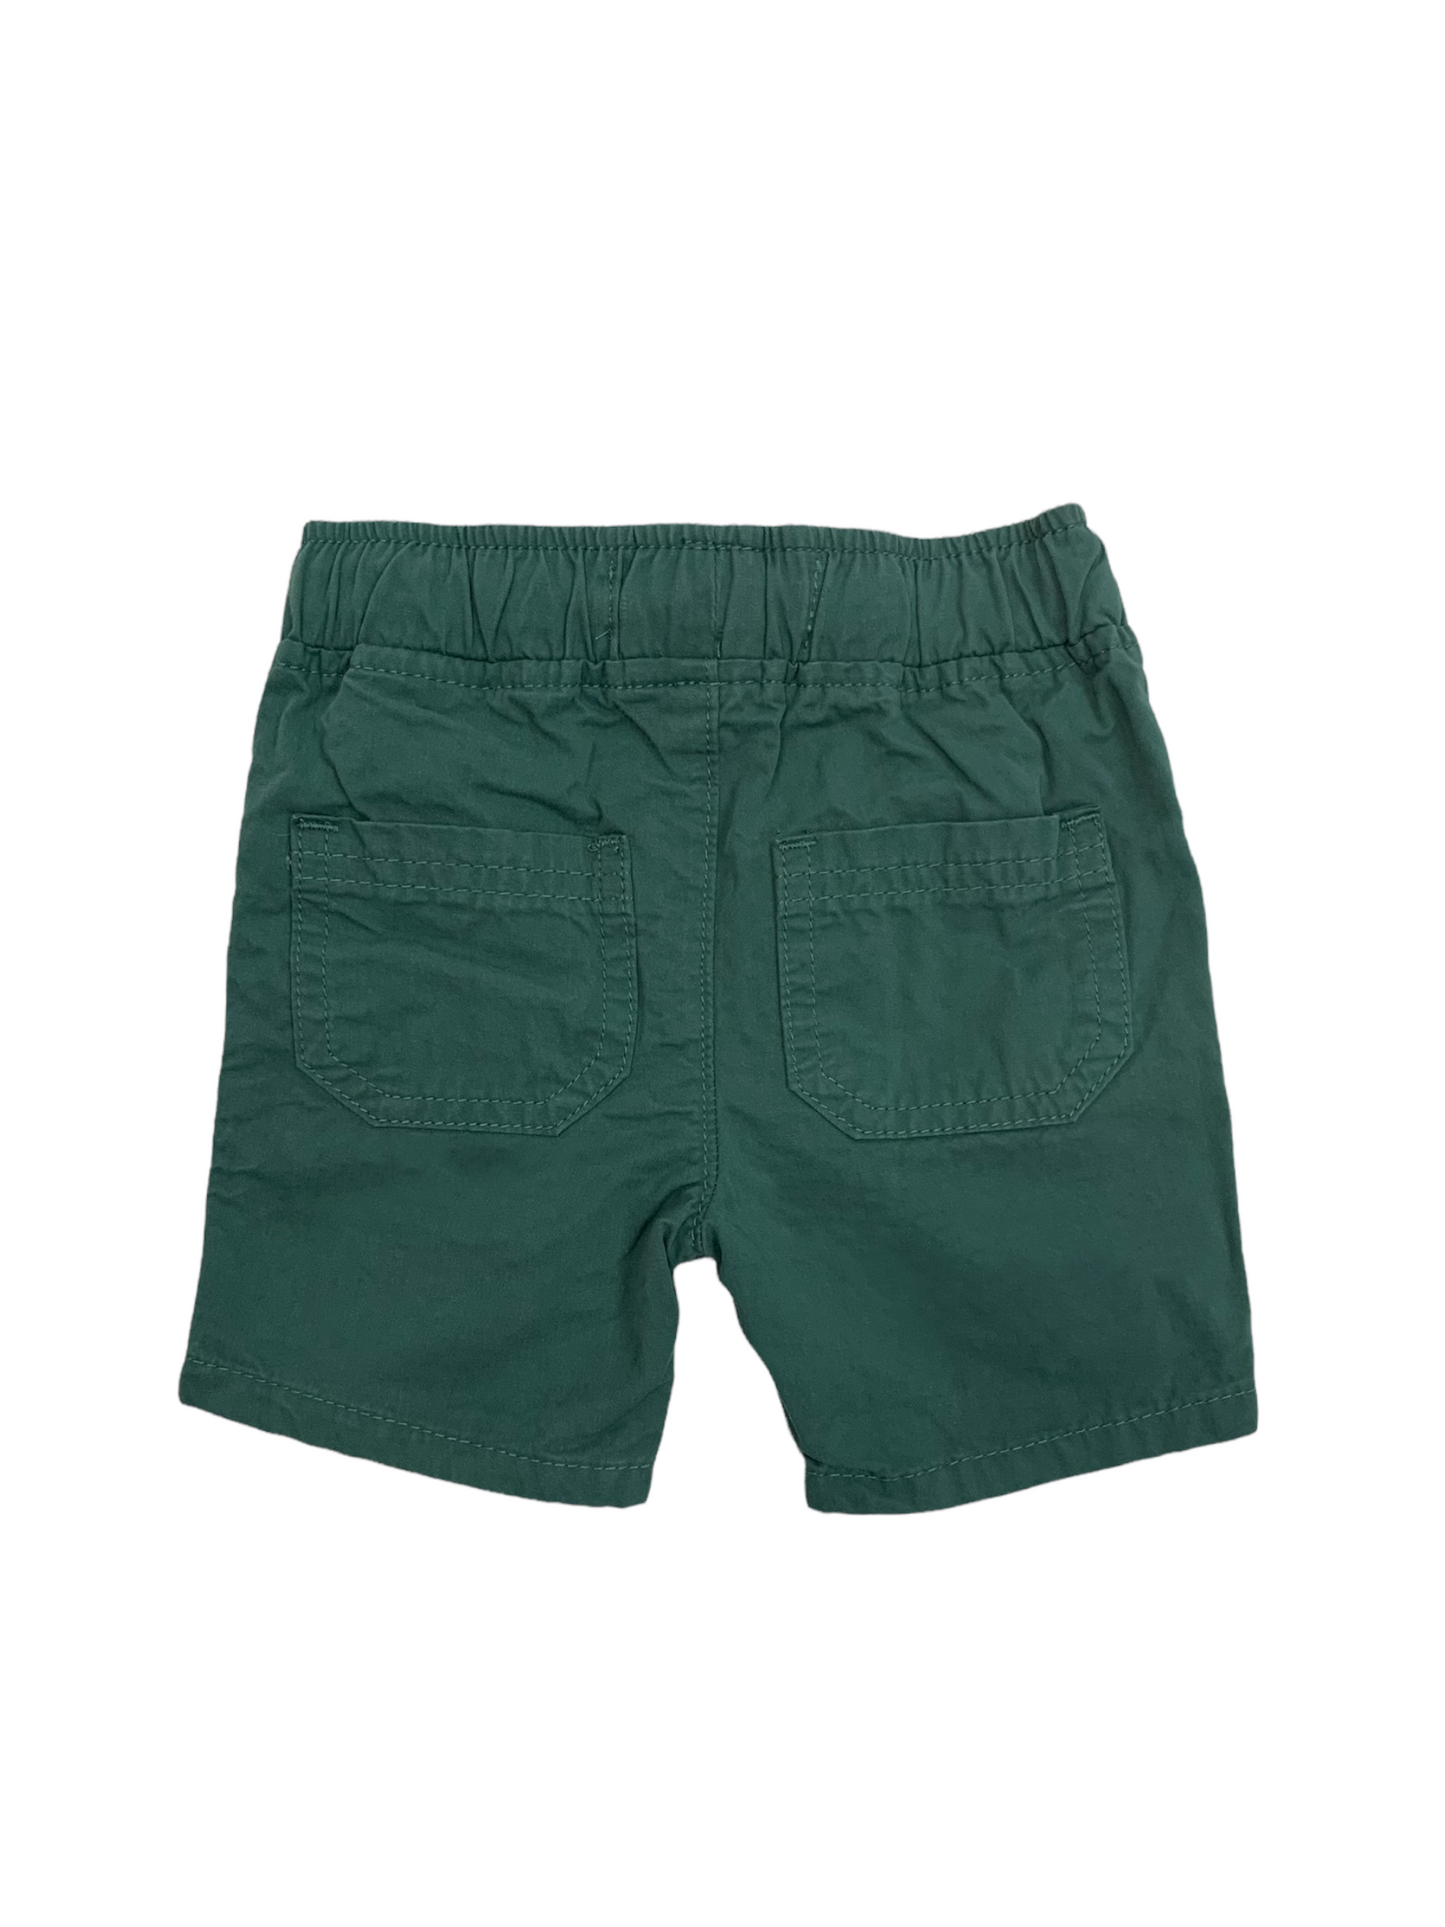 Romy&Aksel green Bermuda shorts 6 to 24 months